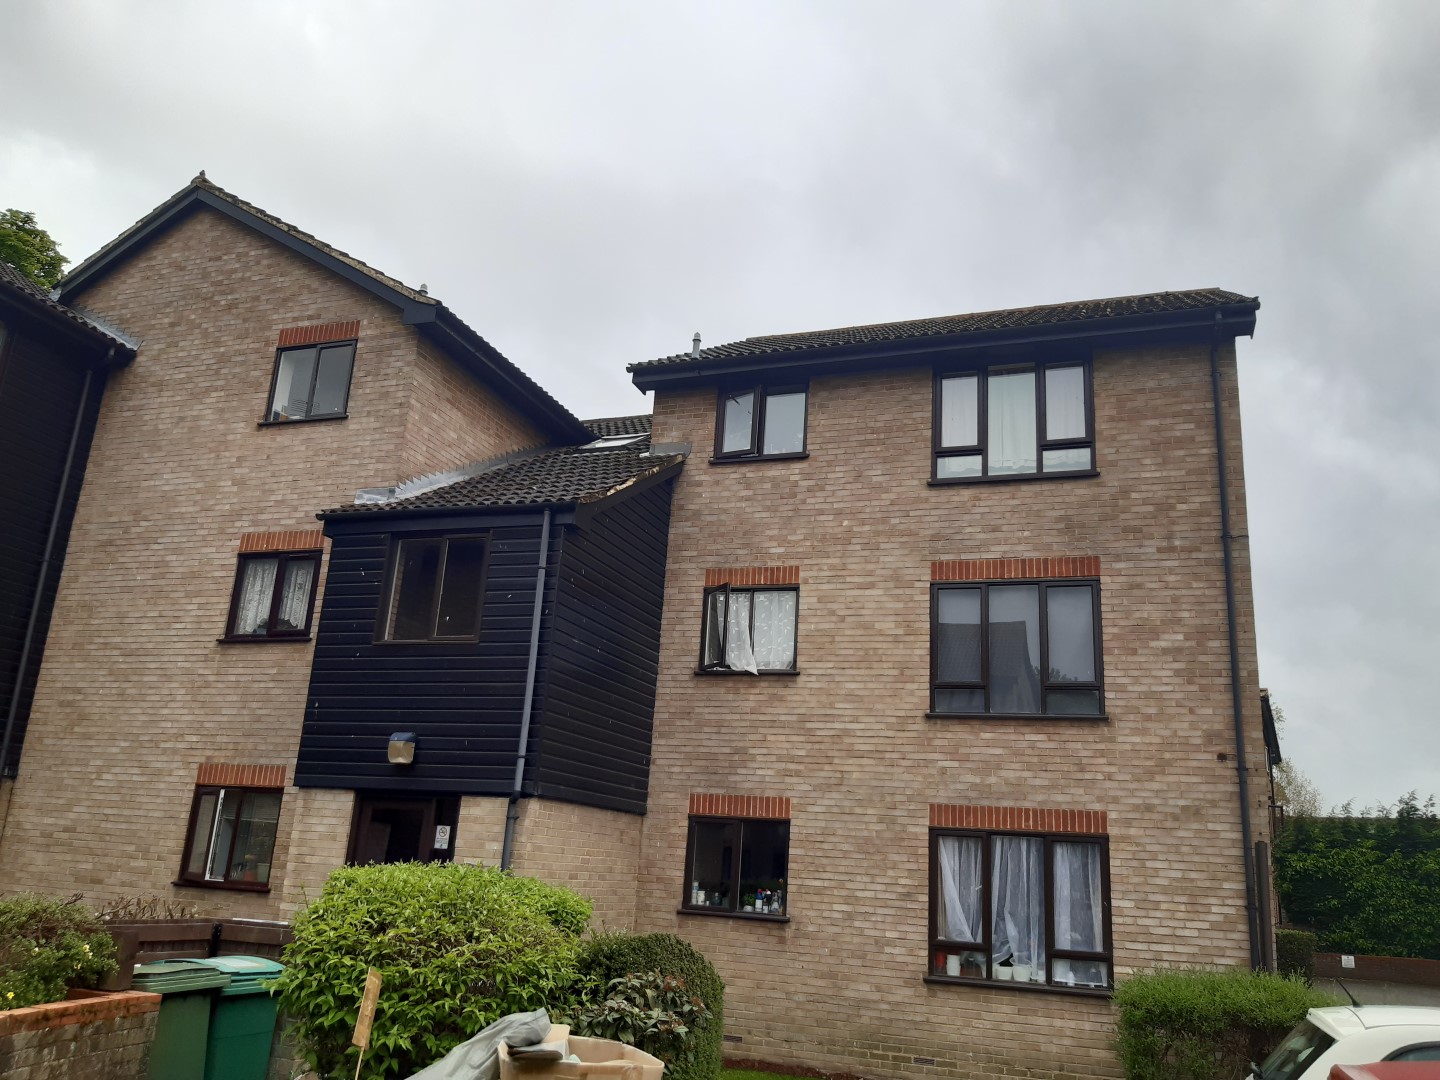 1 bed Flat for rent in Mitcham. From ubaTaeCJ